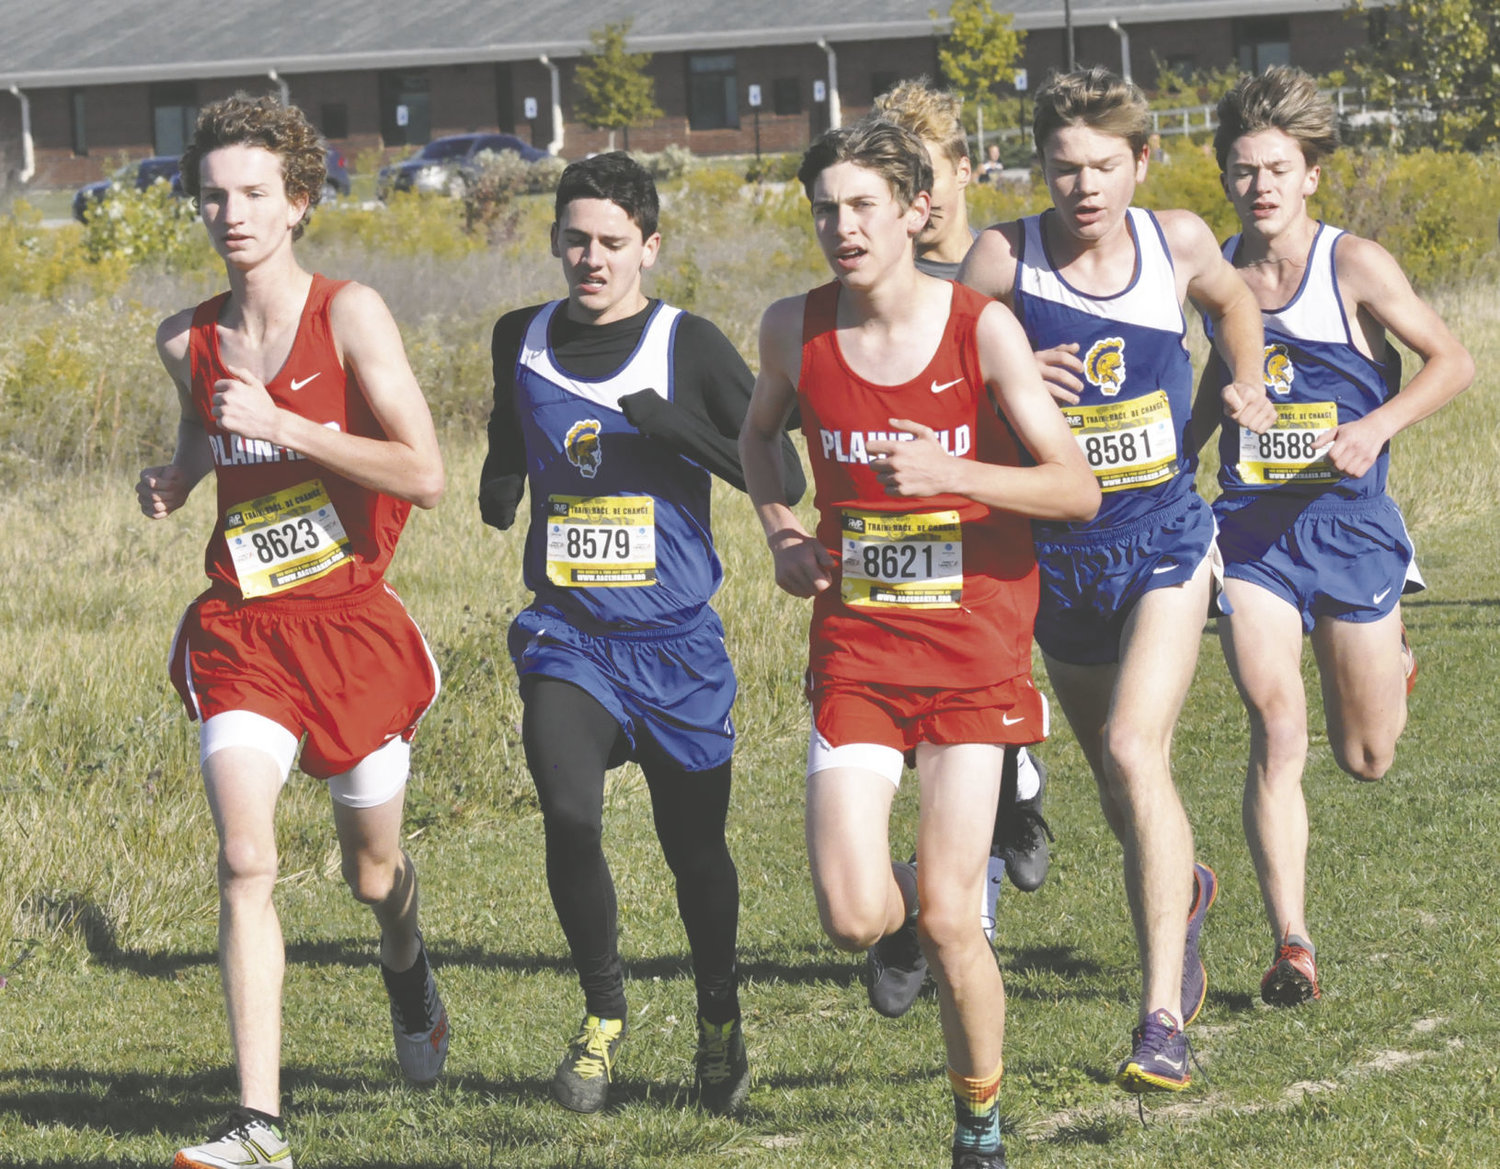 Crawfordsville's Hunter Hutchison, Drake Hayes, and Eli Widmer used pack running to pace the Athenians and lead them to a fourth place finish overall.